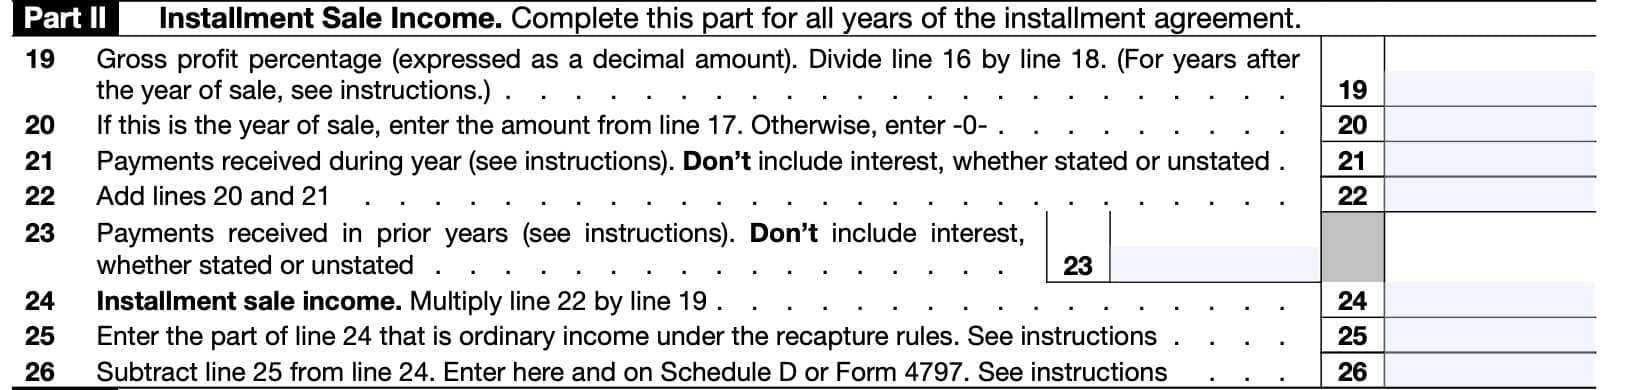 irs form 6252 part ii: installment sale income